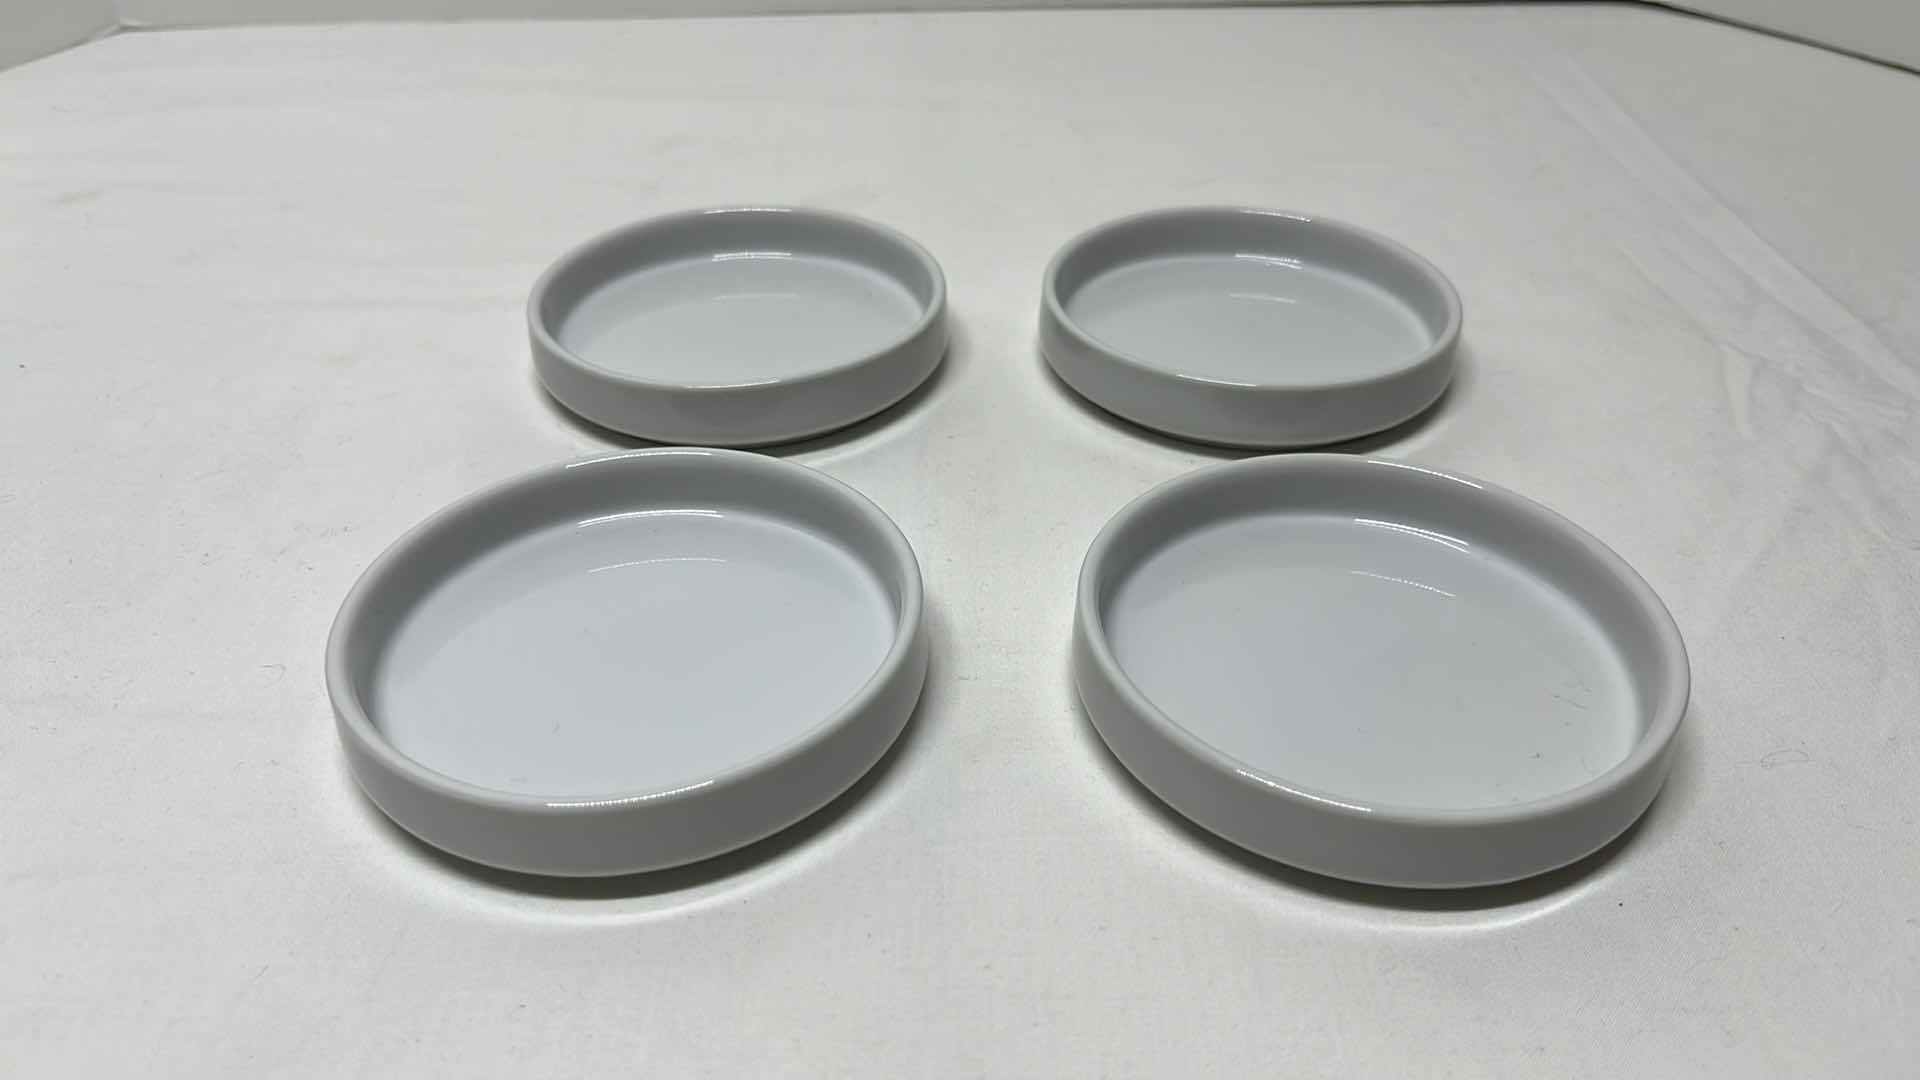 Photo 3 of BOAT STYLE PLATES, BUTTER DISH, BOWL & SMALL PLATES (10 PCS)